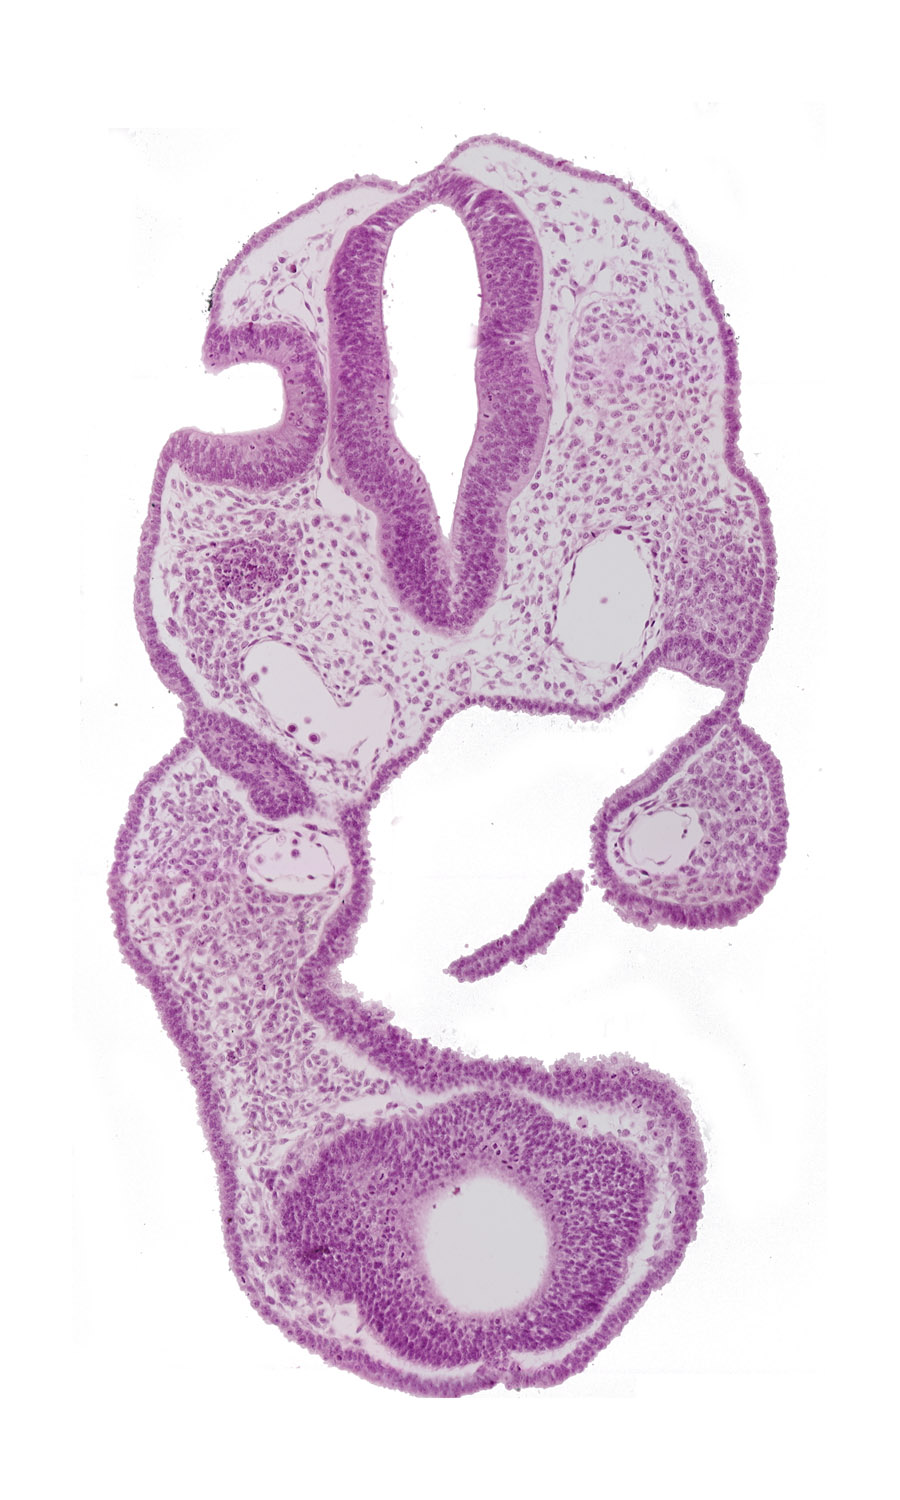 adenohypophysial pouch, aortic arch 1, caudal edge of otic vesicle, dorsal aorta, edge of optic vesicle, endoderm, neuropore site, notochord, oropharyngeal membrane, pharyngeal pouch 1, primary head vein tributary, prosencoel (third ventricle), rhombencephalon (Rh. 5), rhombencephalon (Rh. 6), telencephalon medium (T)